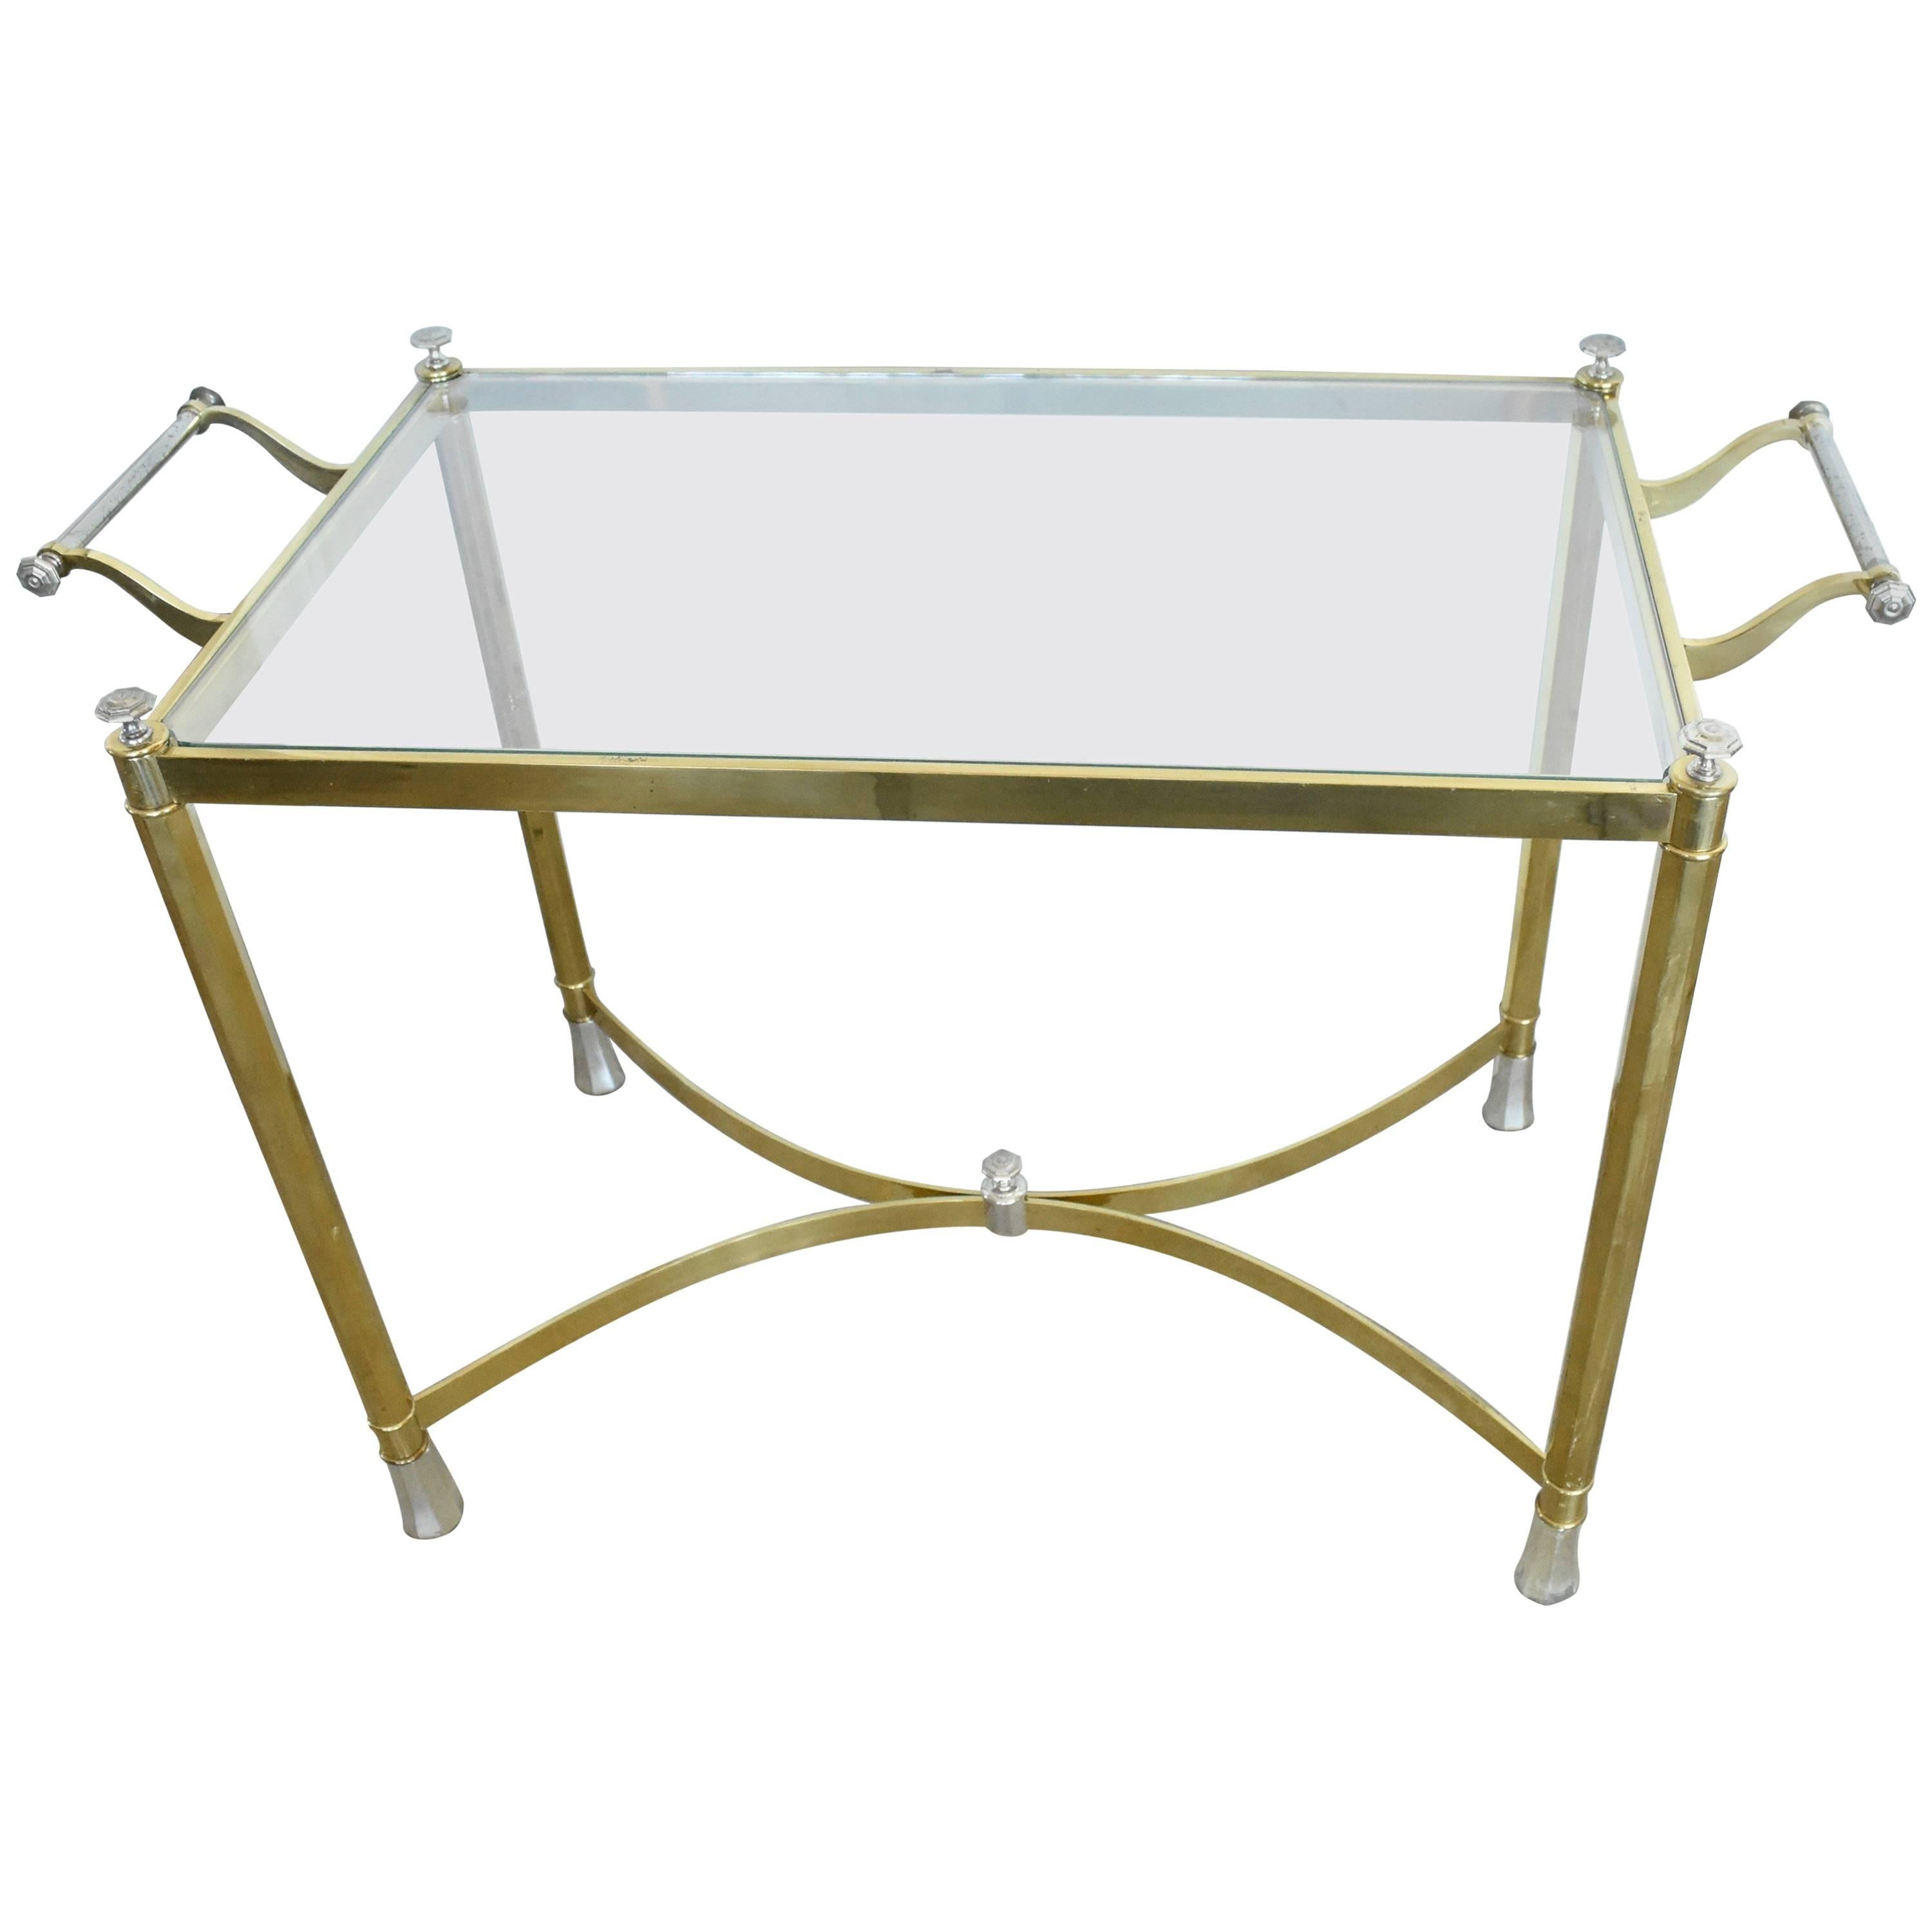 Vintage 1970s Italian Brass and Silver Plated Table or Bar Cart